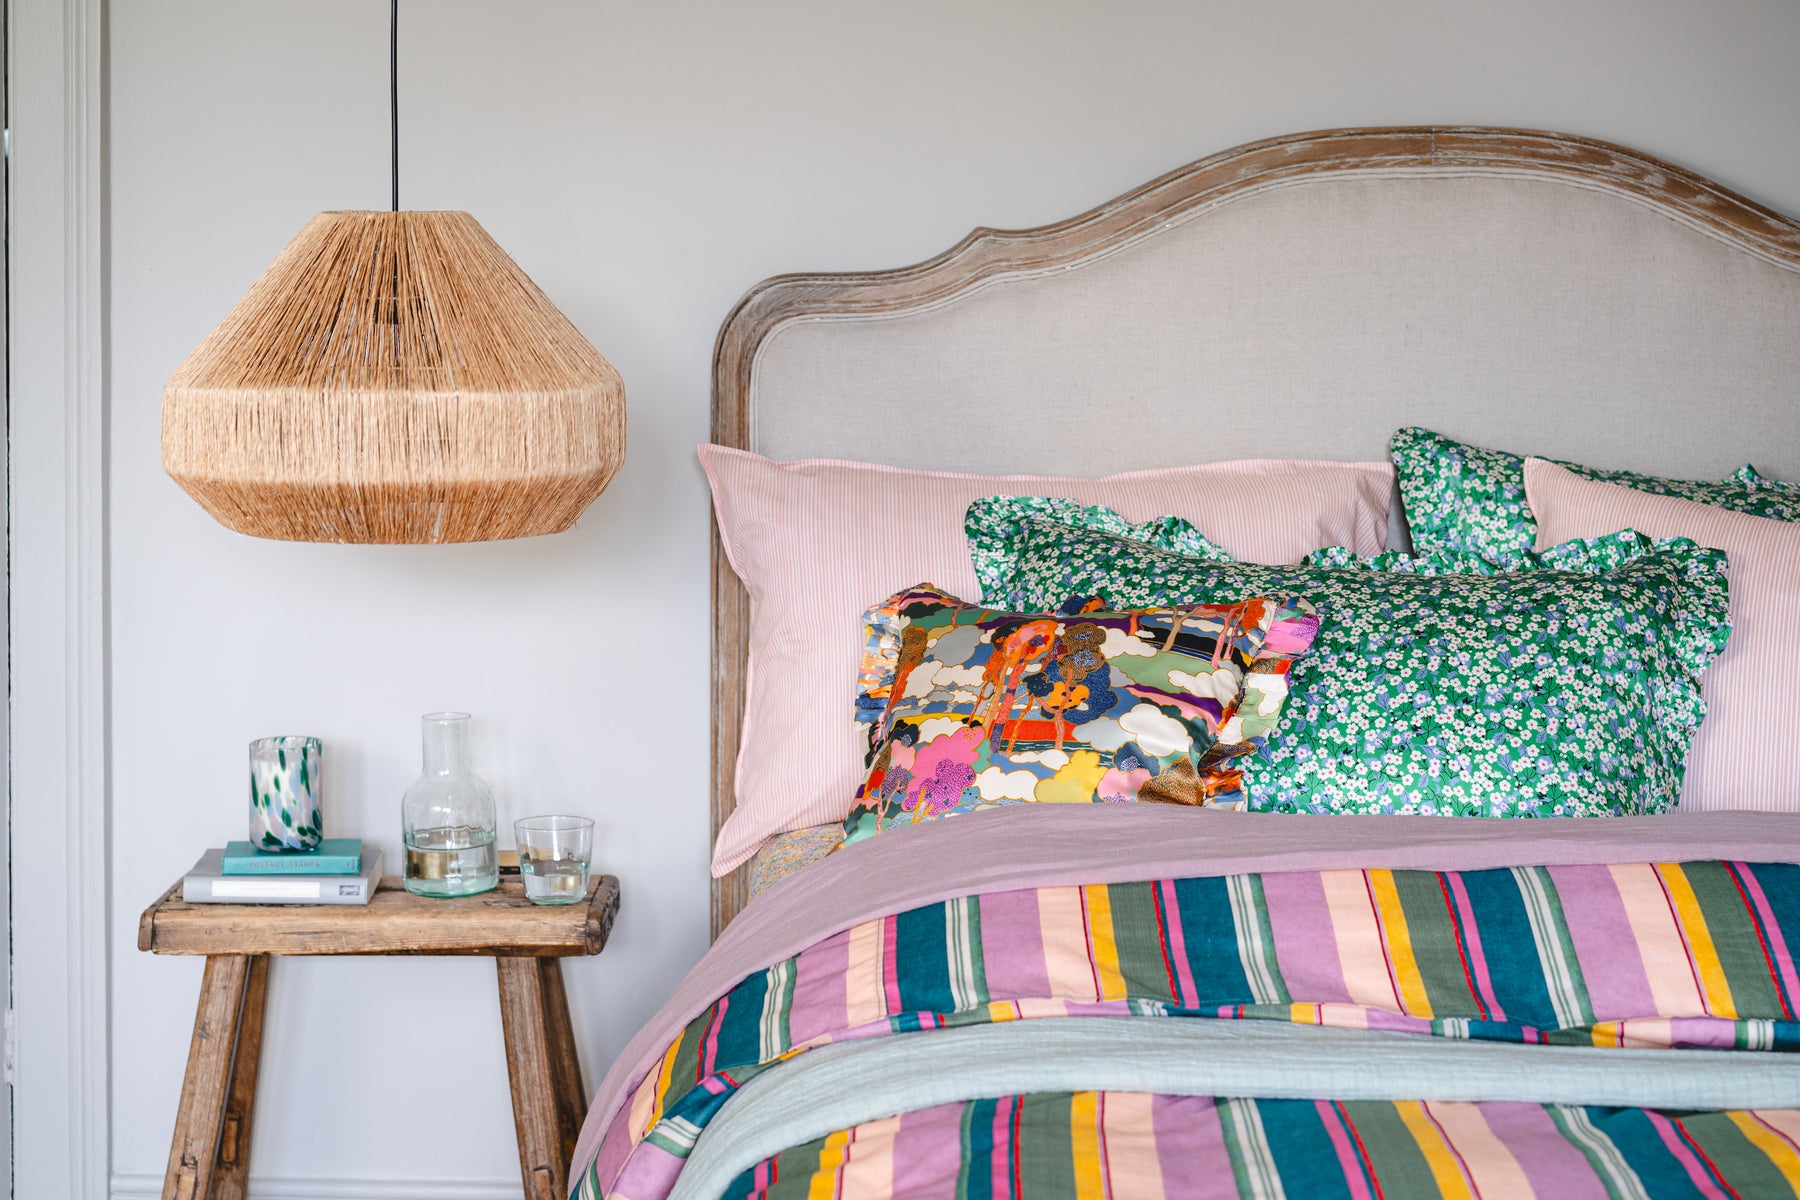 New arrivals from Coco & Wolf including luxurious Liberty fabric bedding, table linen and homewares